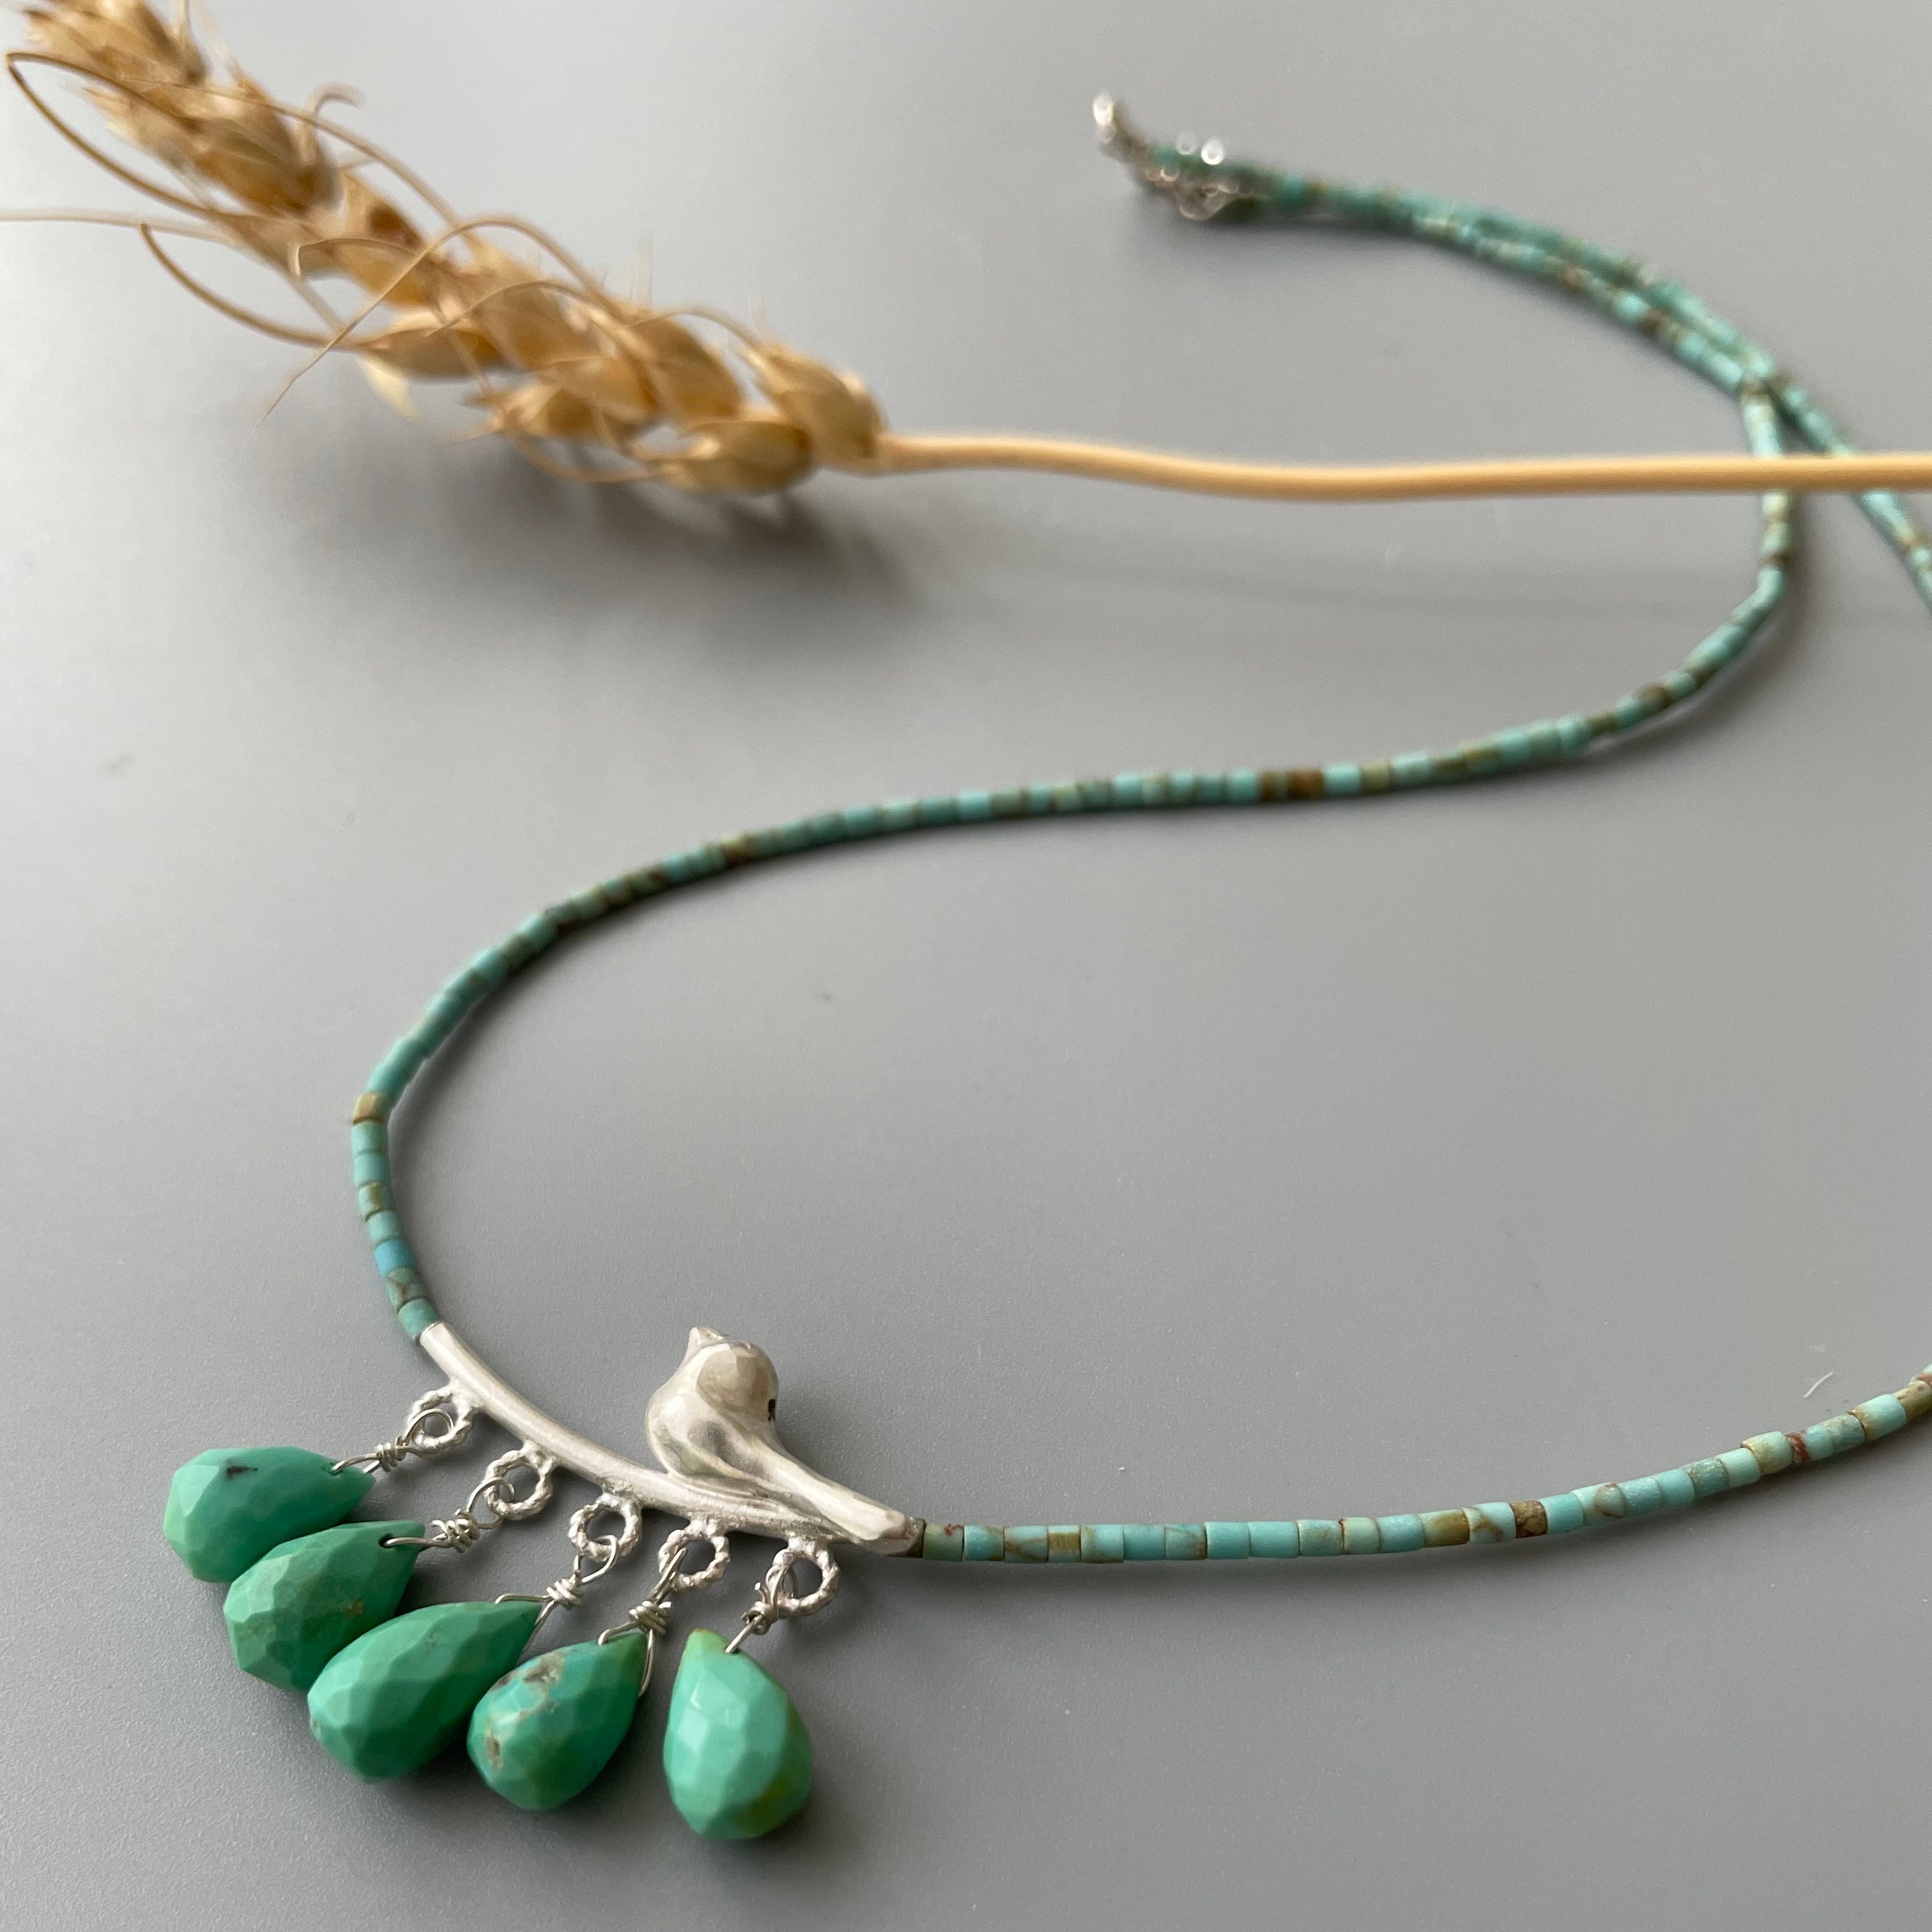 Persian Turquoise Jewelry-Handmade Silver Necklace with Birds and Turquoises: Persian Jewelry-AFRA ART GALLERY